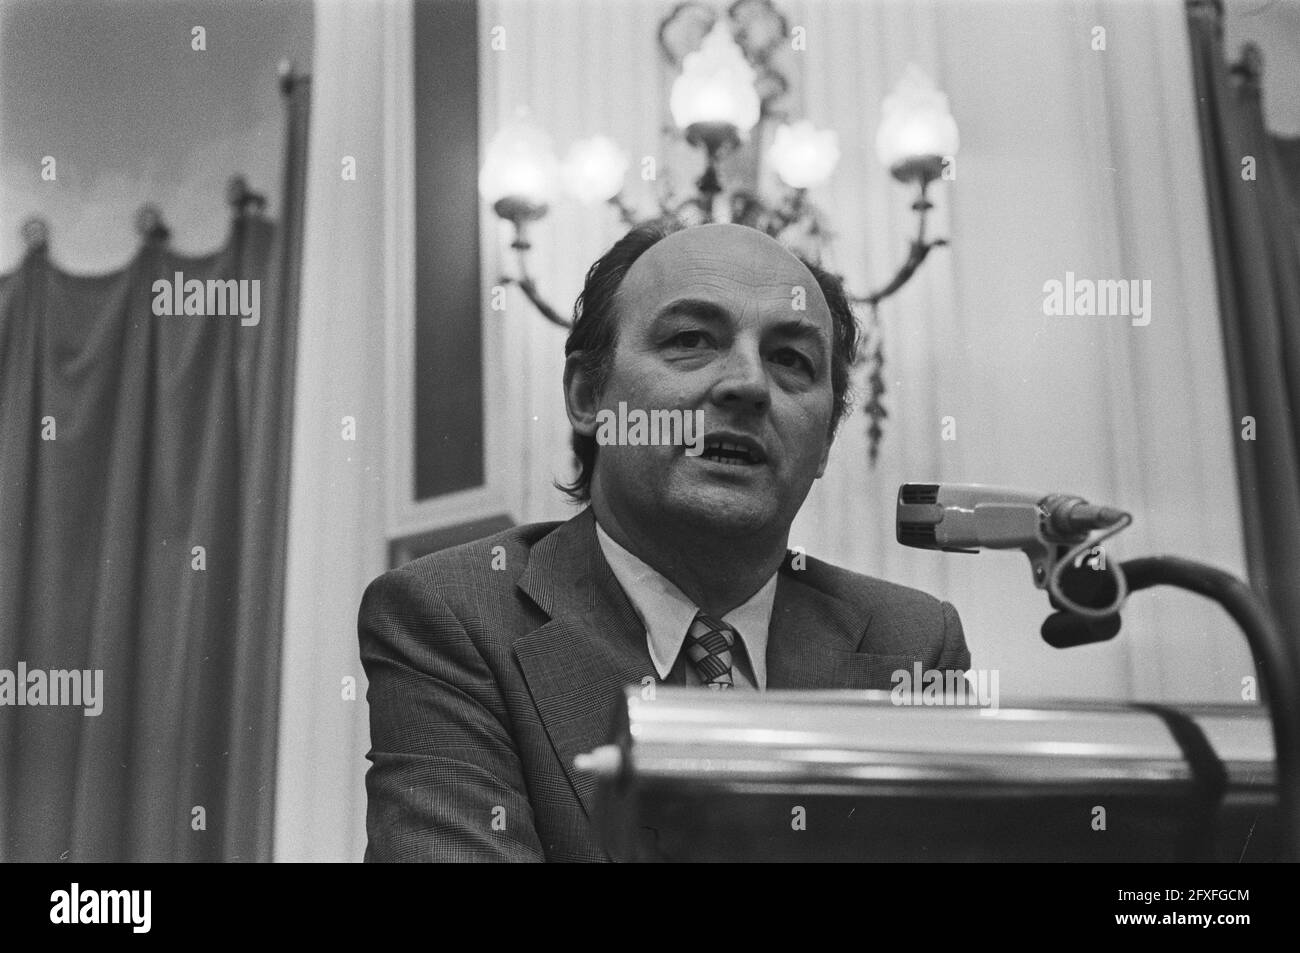 Lower House in connection with debate nuclear order, 19, 20, Aantjes speaking head, 1 June 1976, politics, The Netherlands, 20th century press agency photo, news to remember, documentary, historic photography 1945-1990, visual stories, human history of the Twentieth Century, capturing moments in time Stock Photo